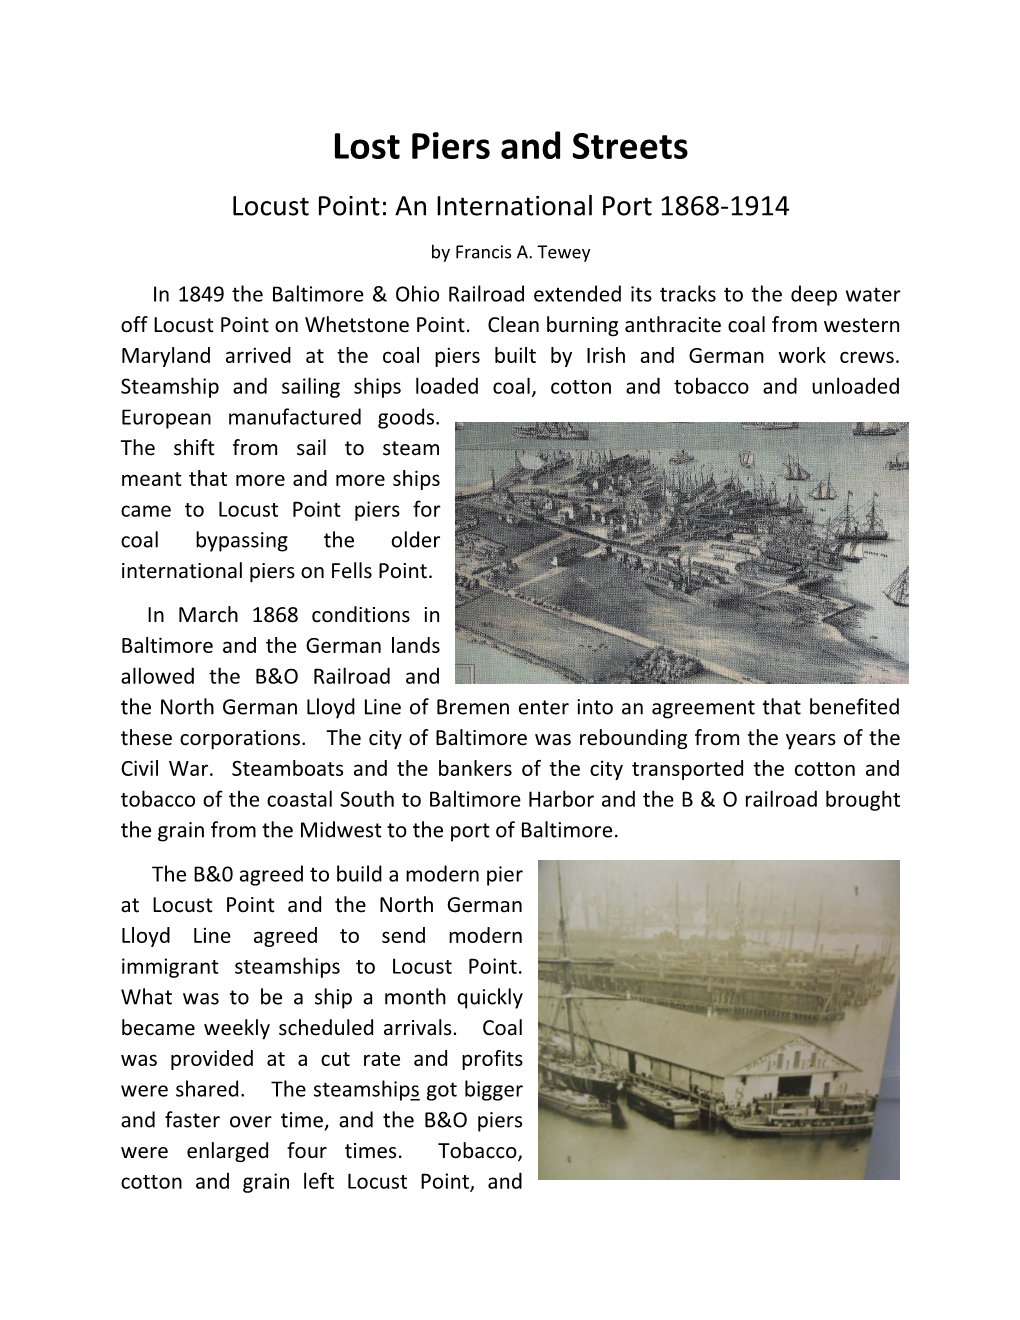 Lost Piers and Streets Locust Point: an International Port 1868-1914 by Francis A